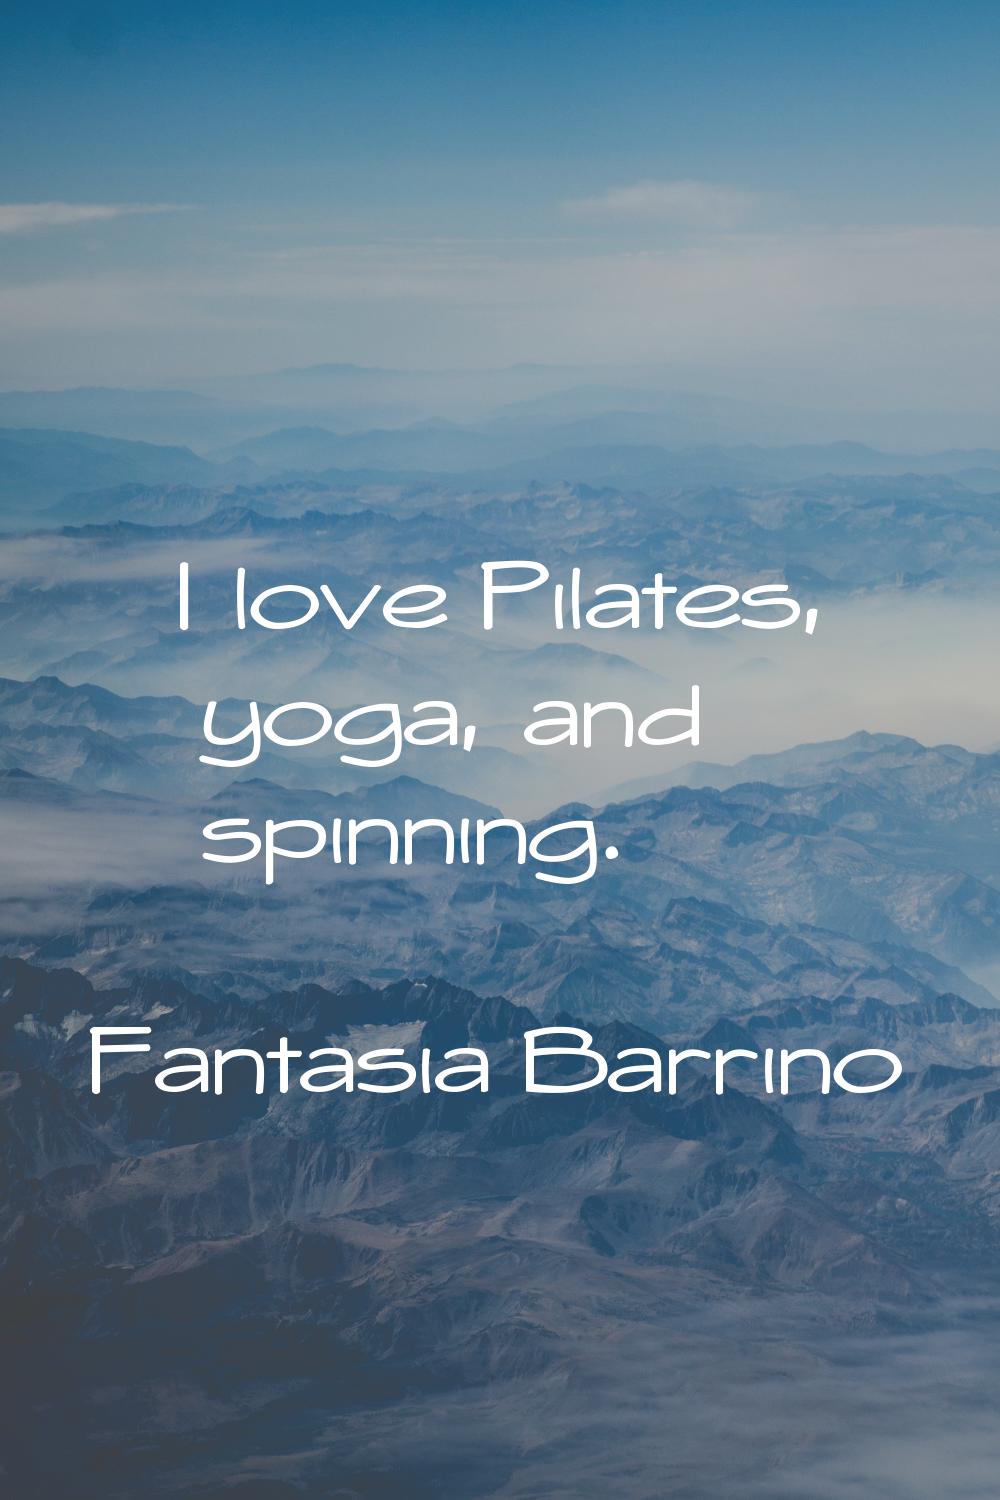 I love Pilates, yoga, and spinning.